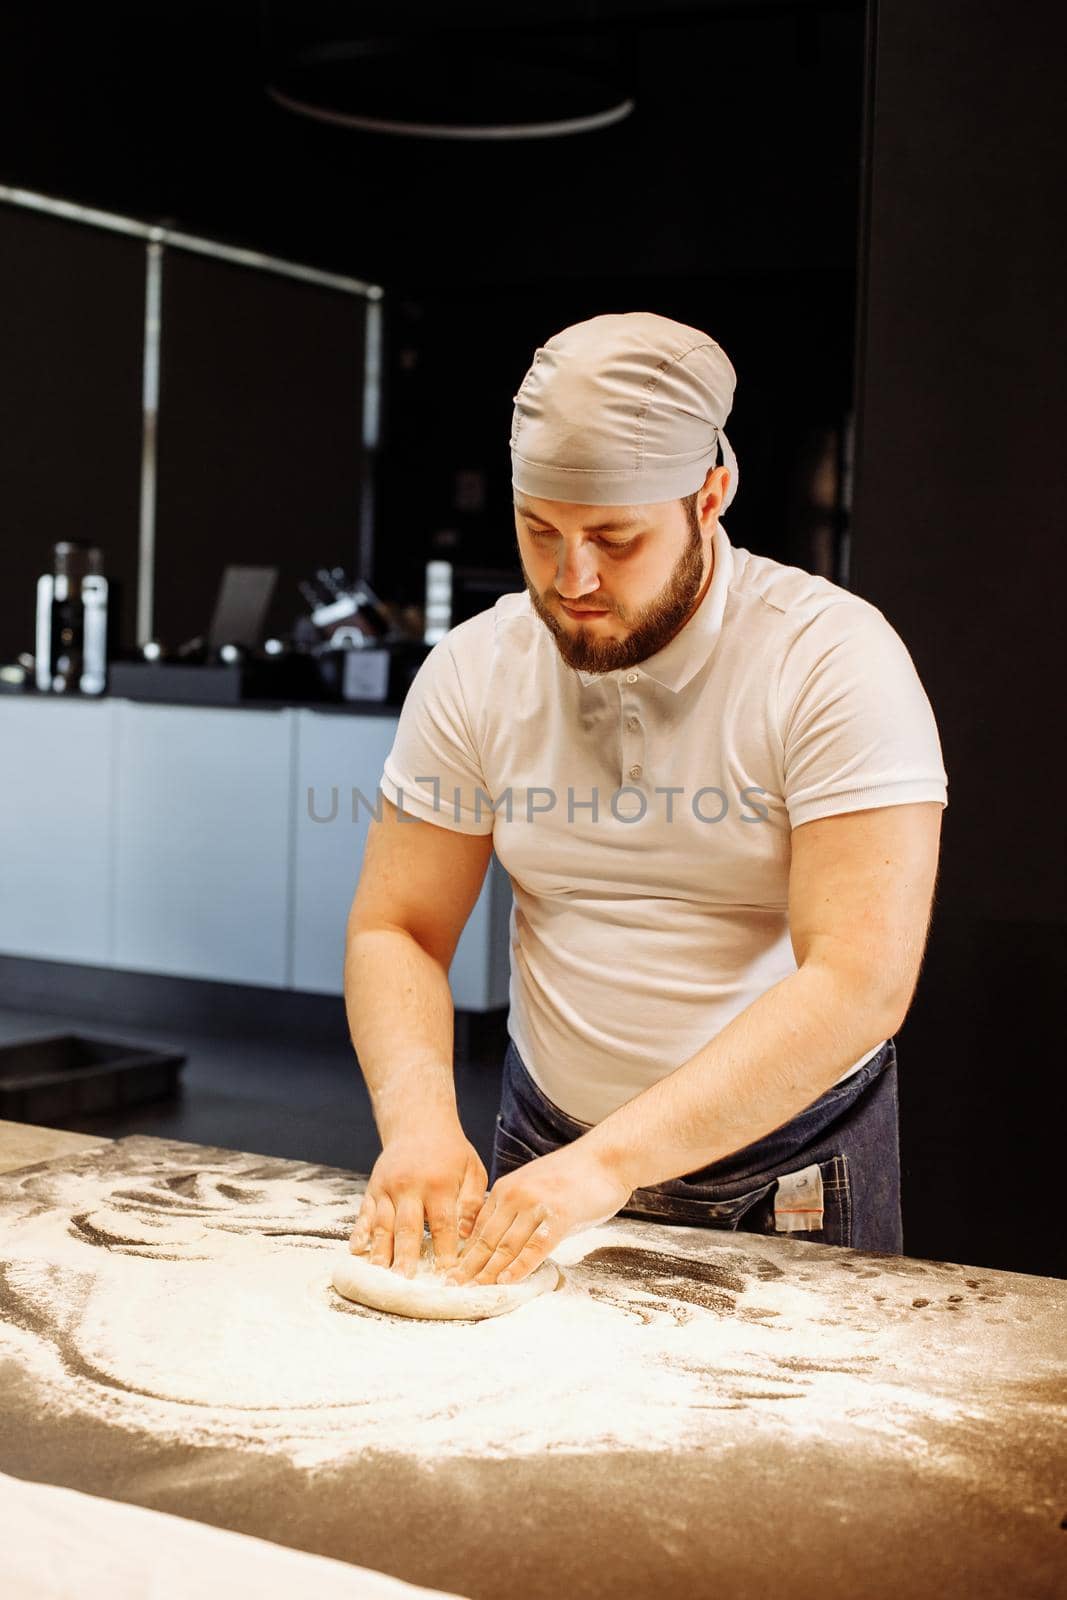 Making dough by hands at bakery or at home.